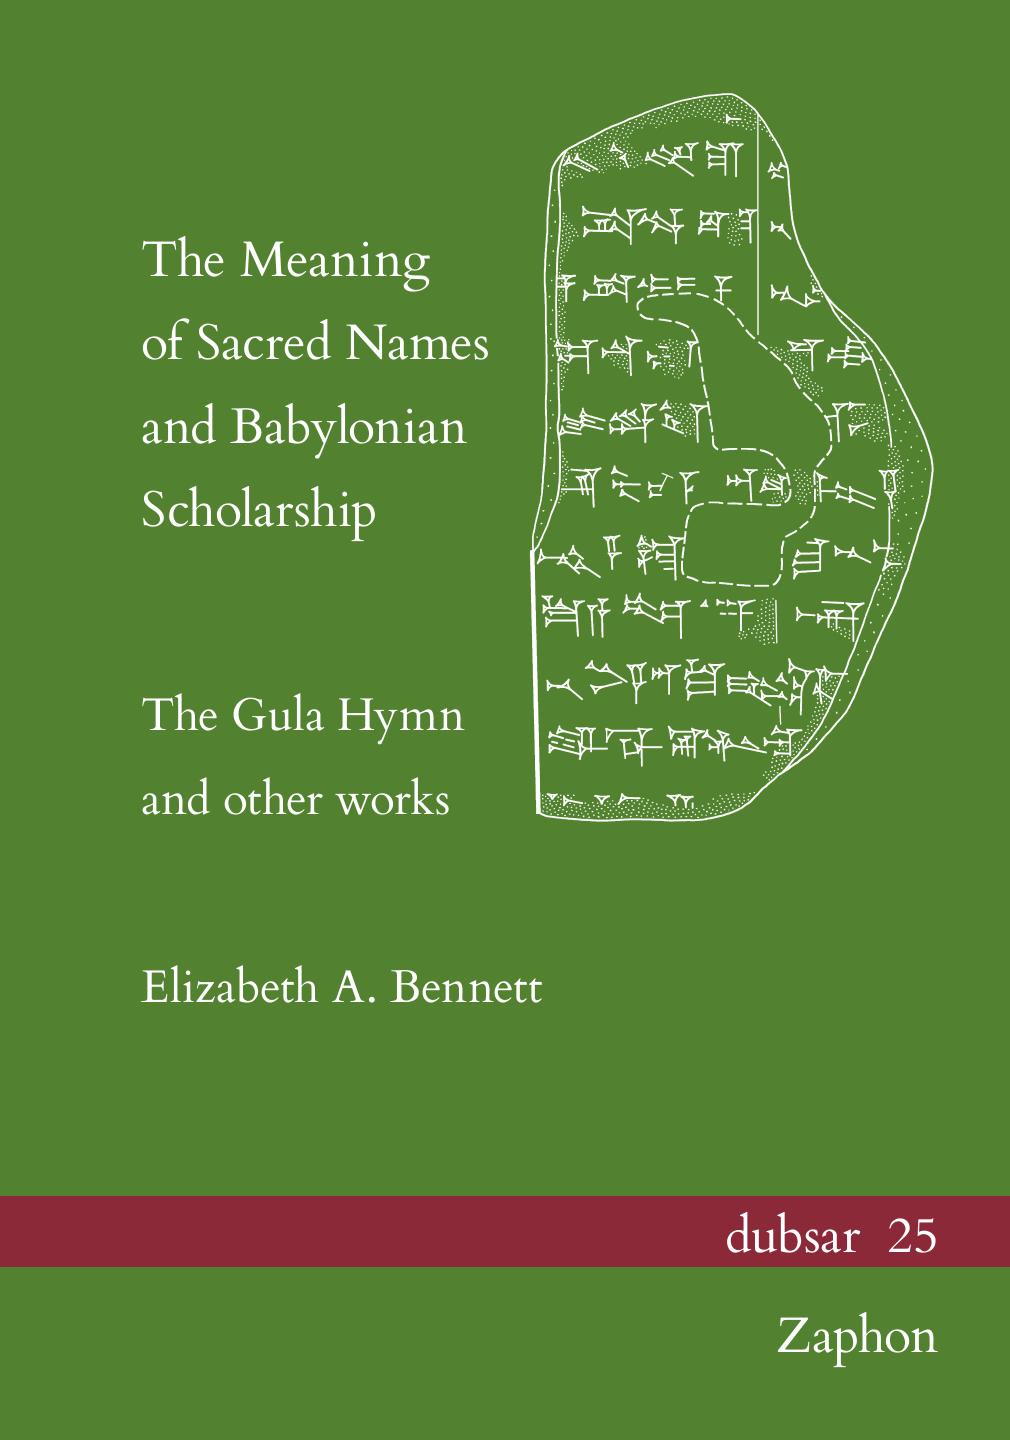 The Meaning of Sacred Names and Babylonian Scholarship: The Gula Hymn and Other Works (Dubsar, 25) by Elizabeth A. Bennett